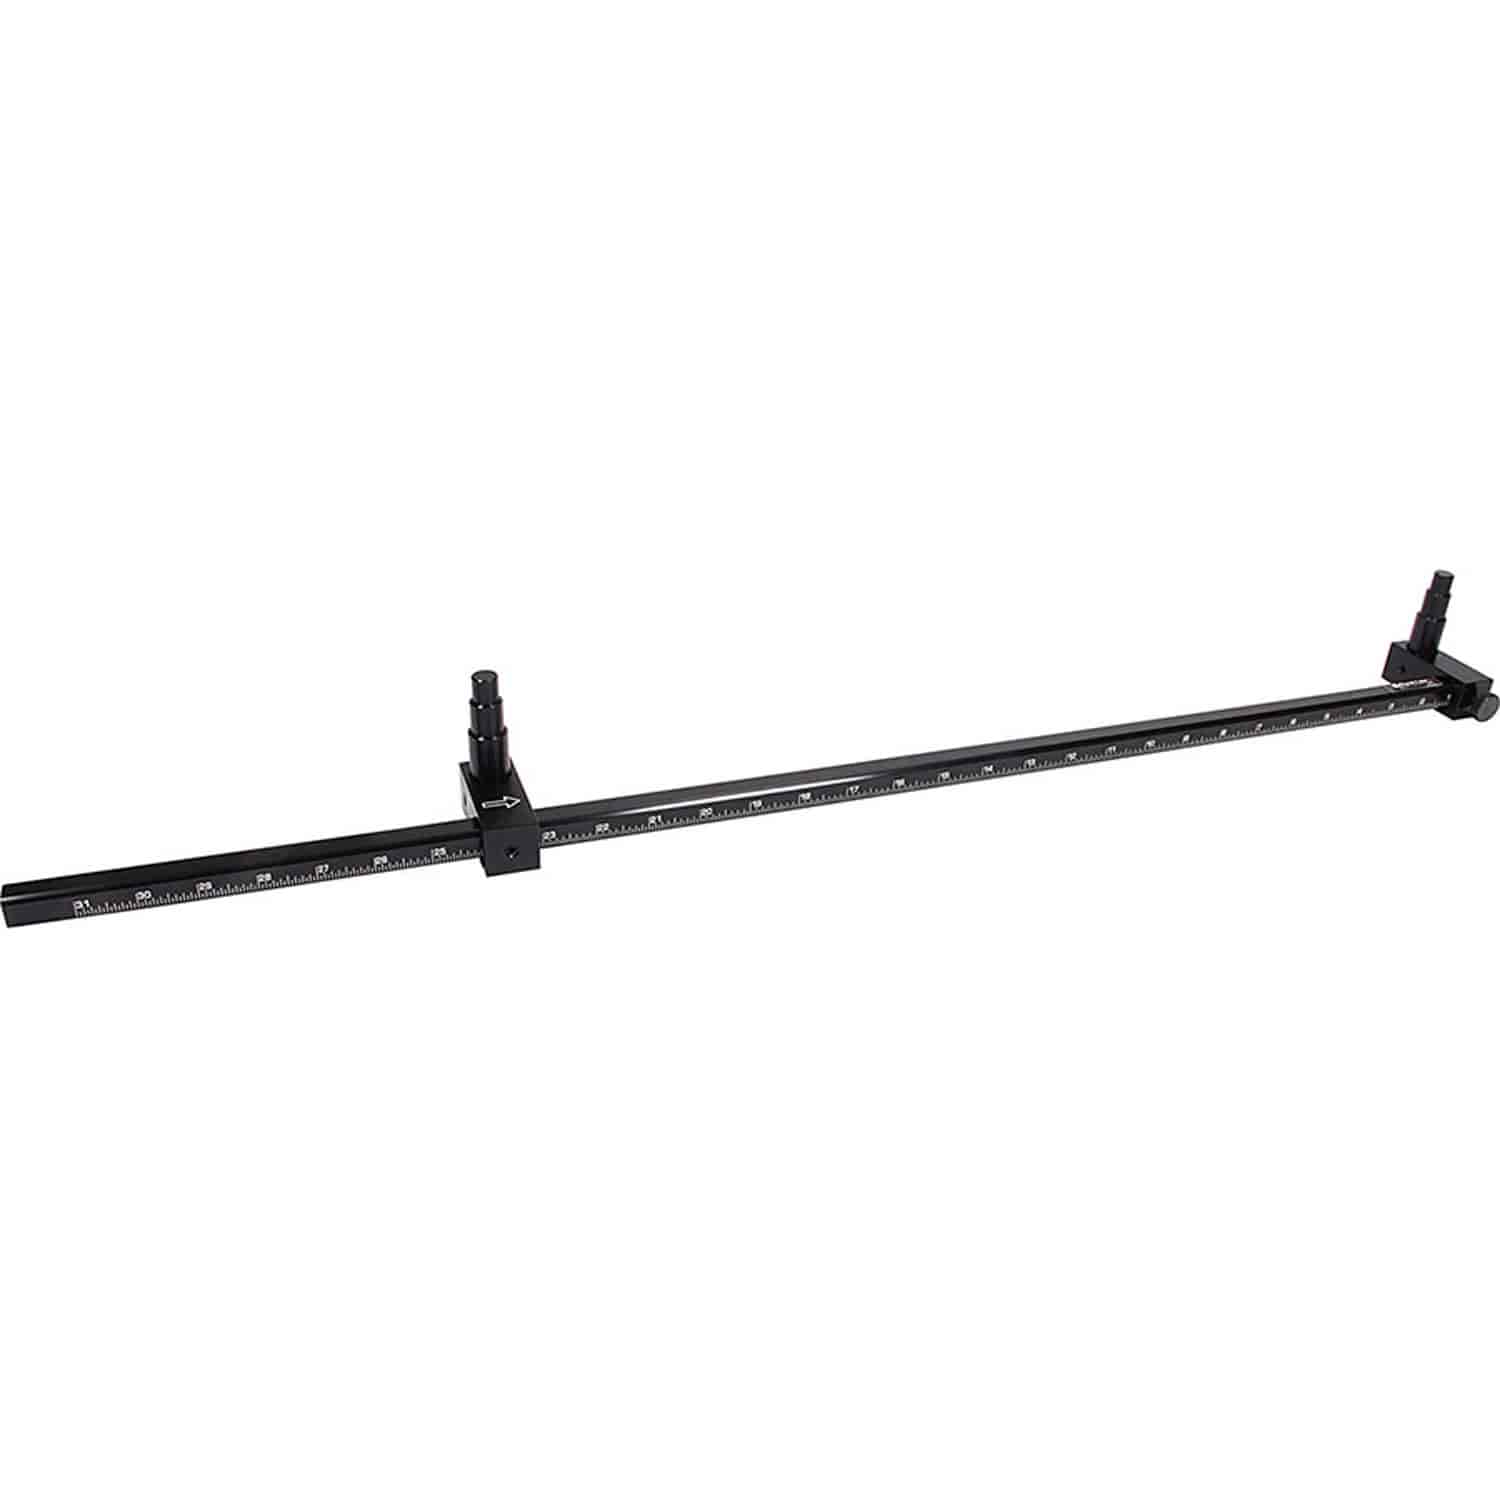 Suspension Tube Set Up Tool Tubes up to 31" Long